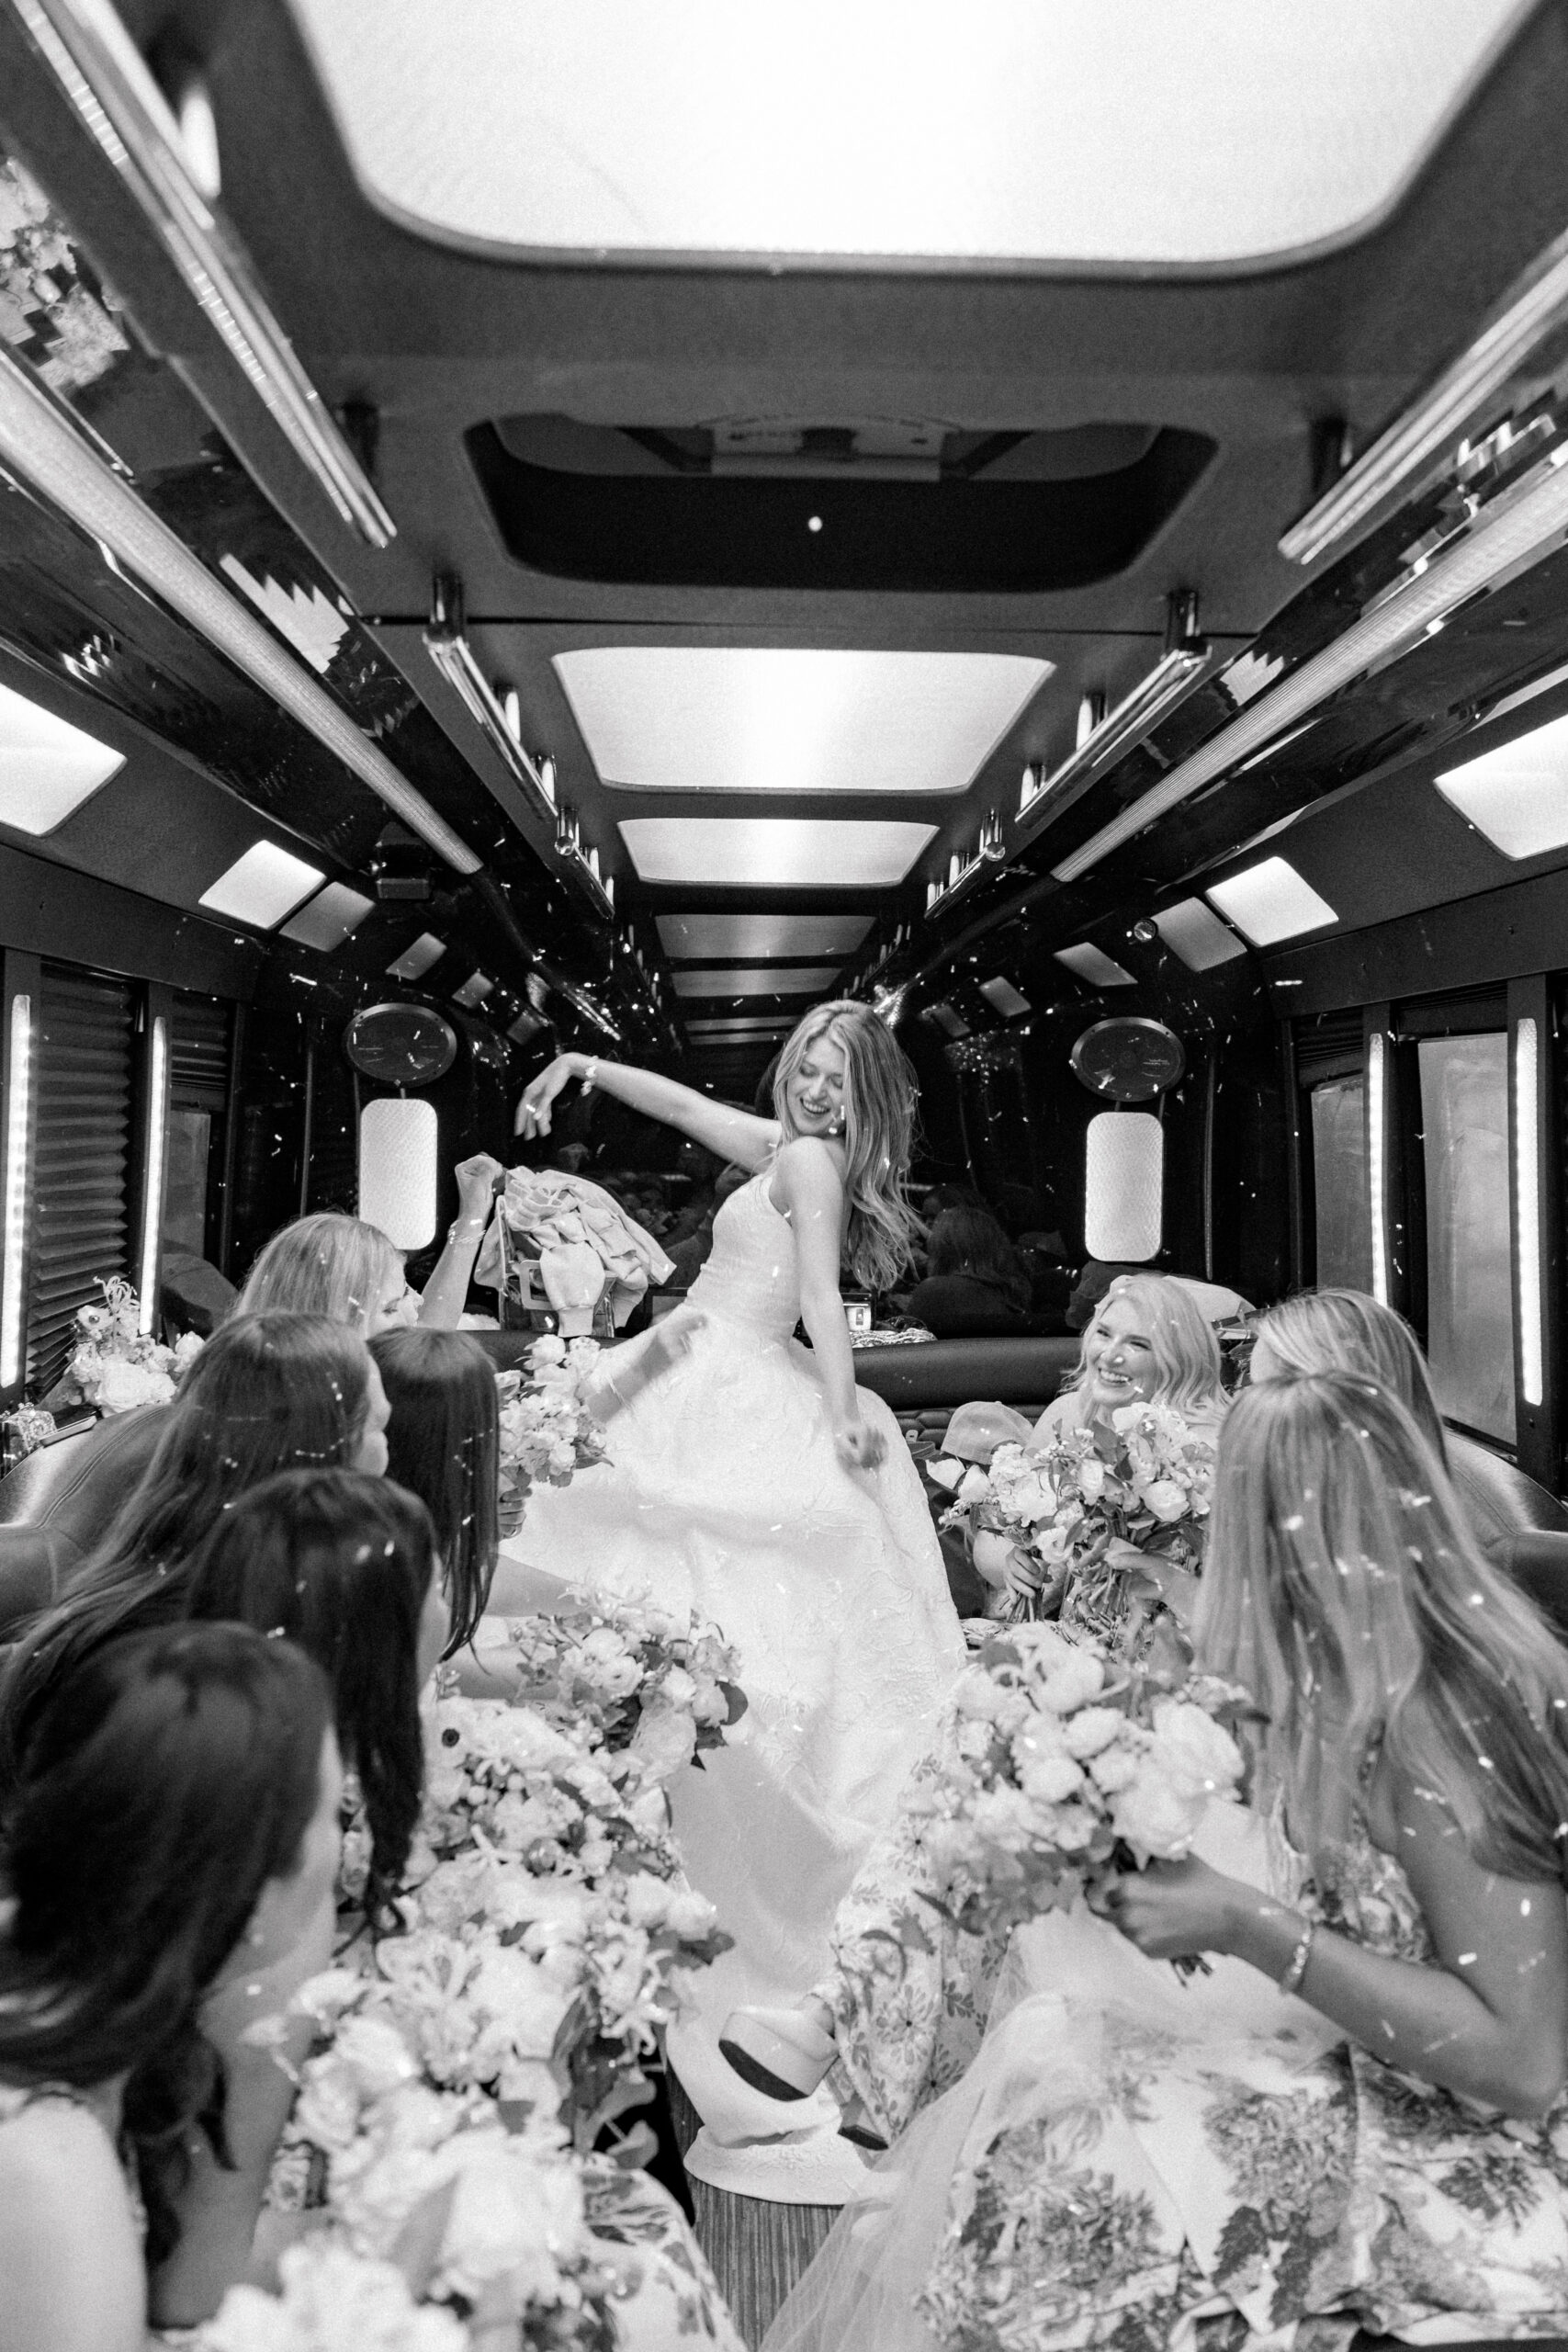 Bride arrives to the wedding ceremony on a party bus. Black and white candid photo of bride with her bridesmaids. 